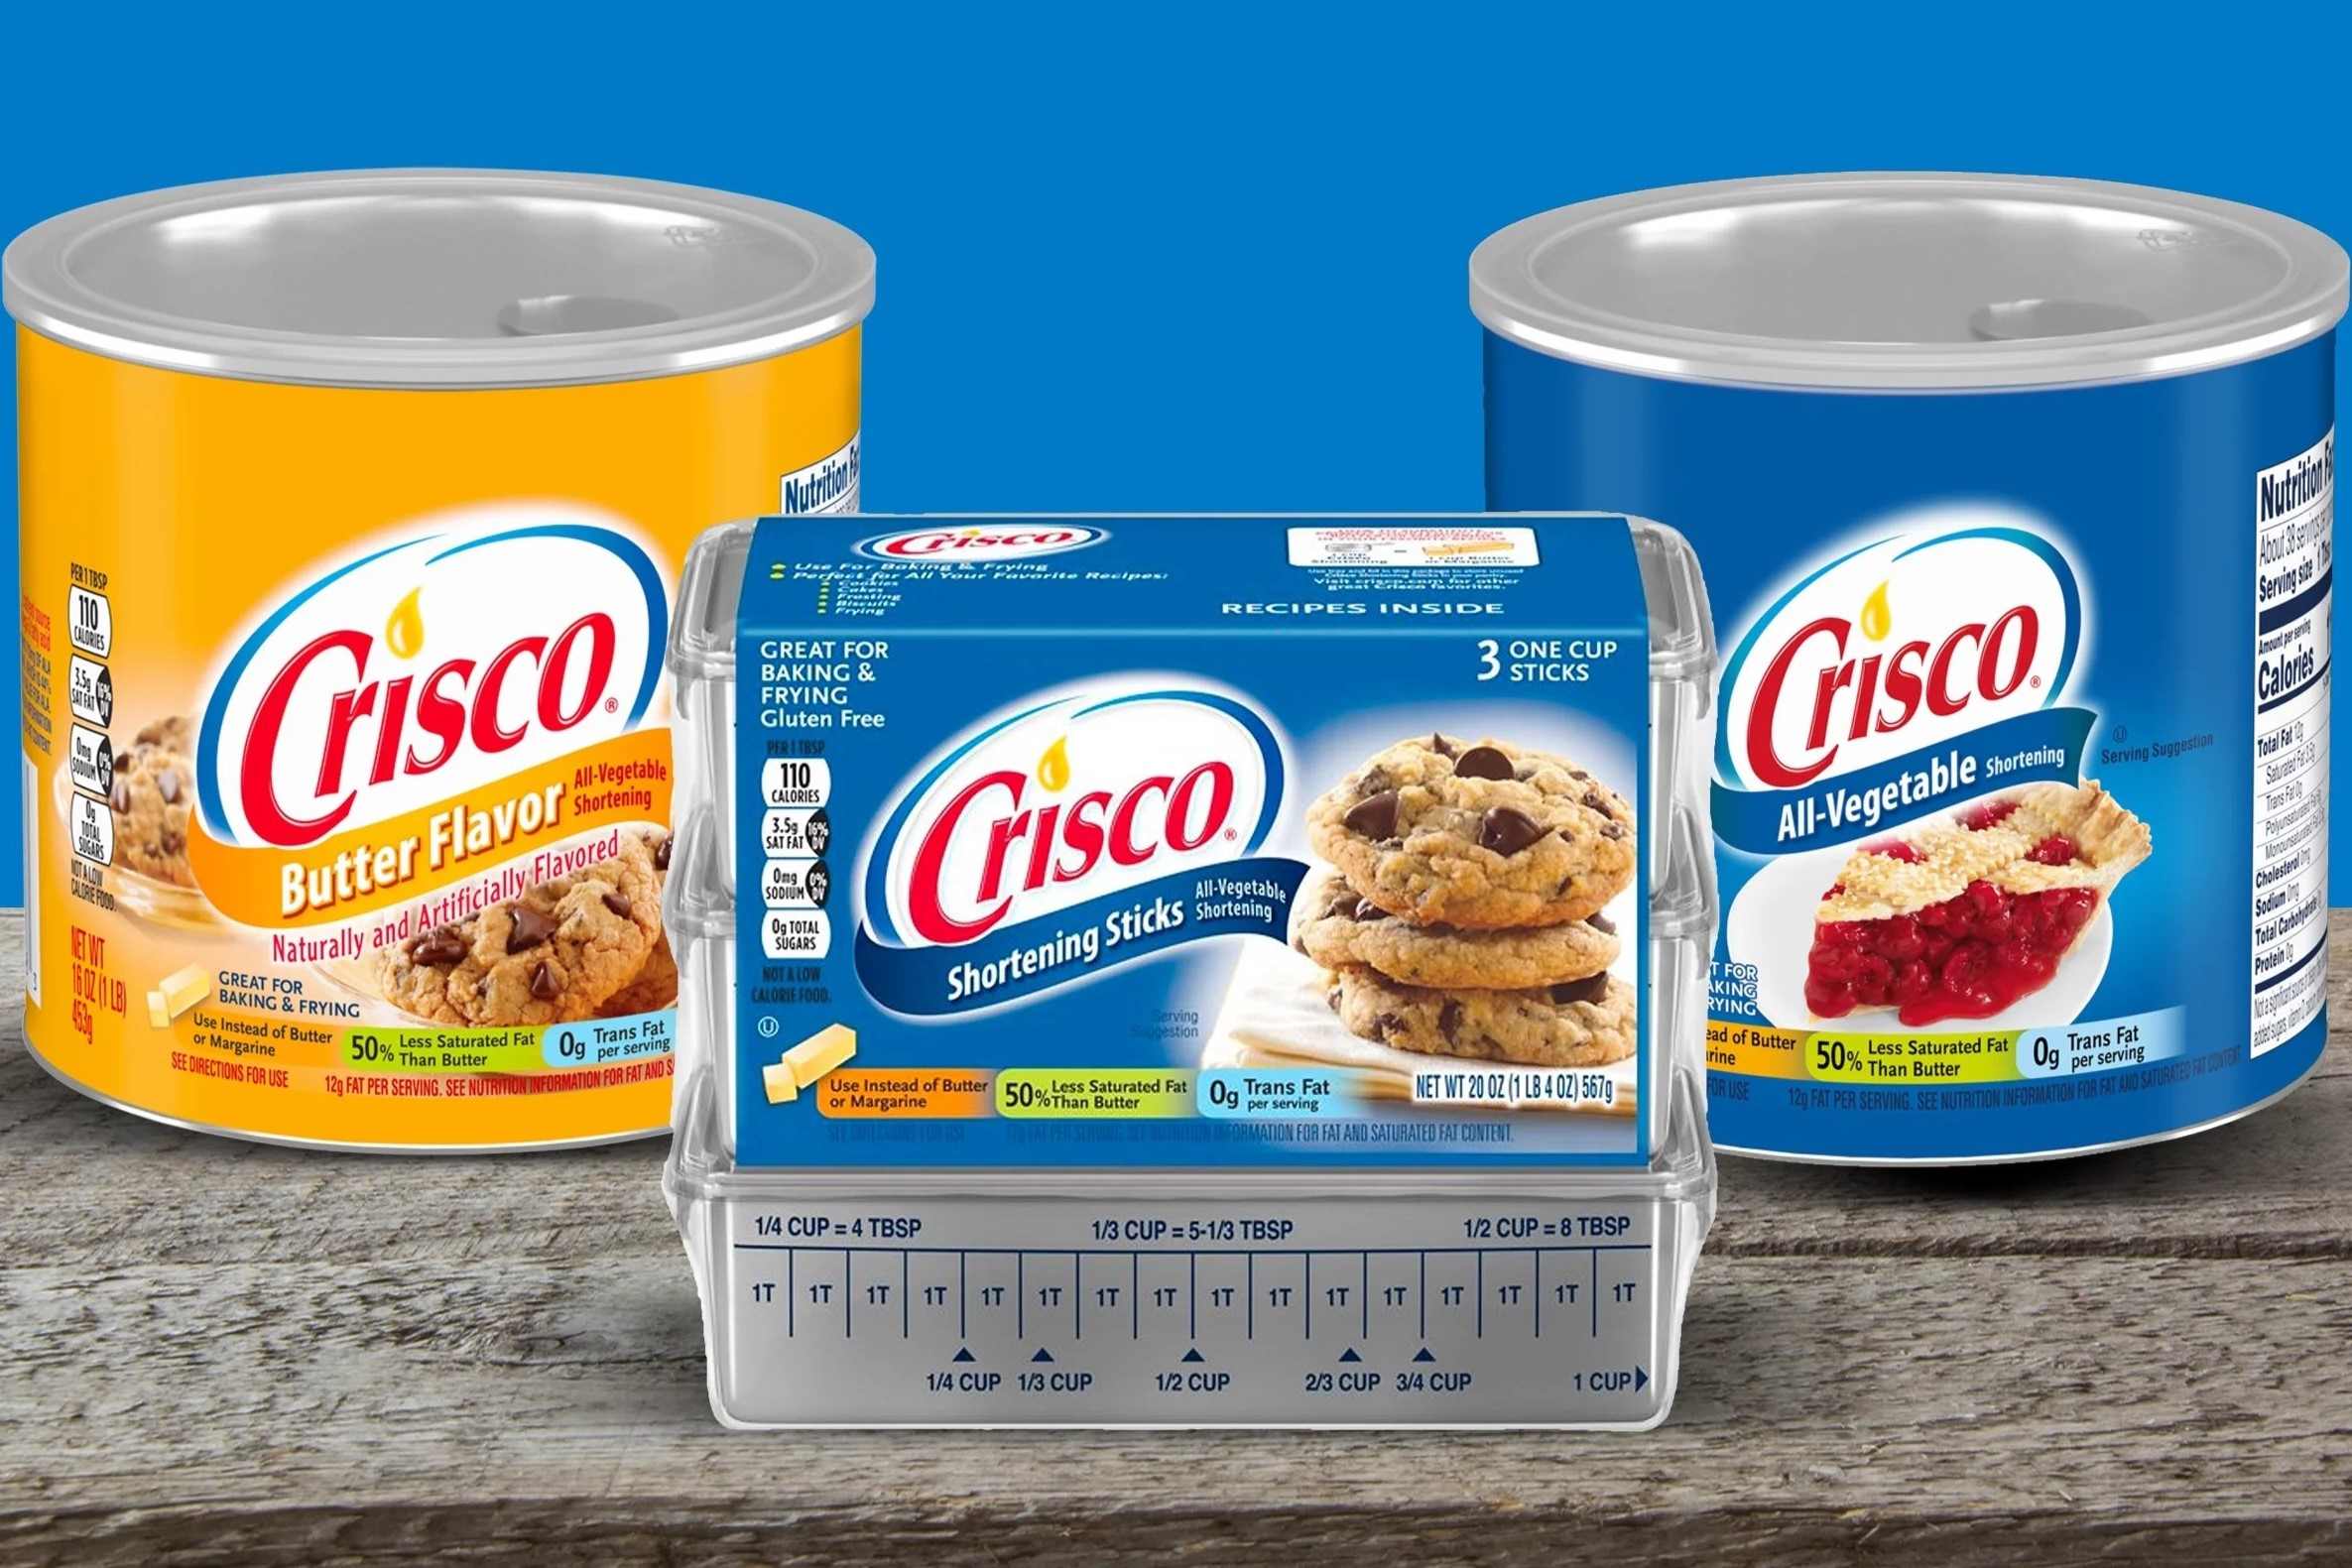 15 Crisco Nutrition Facts 